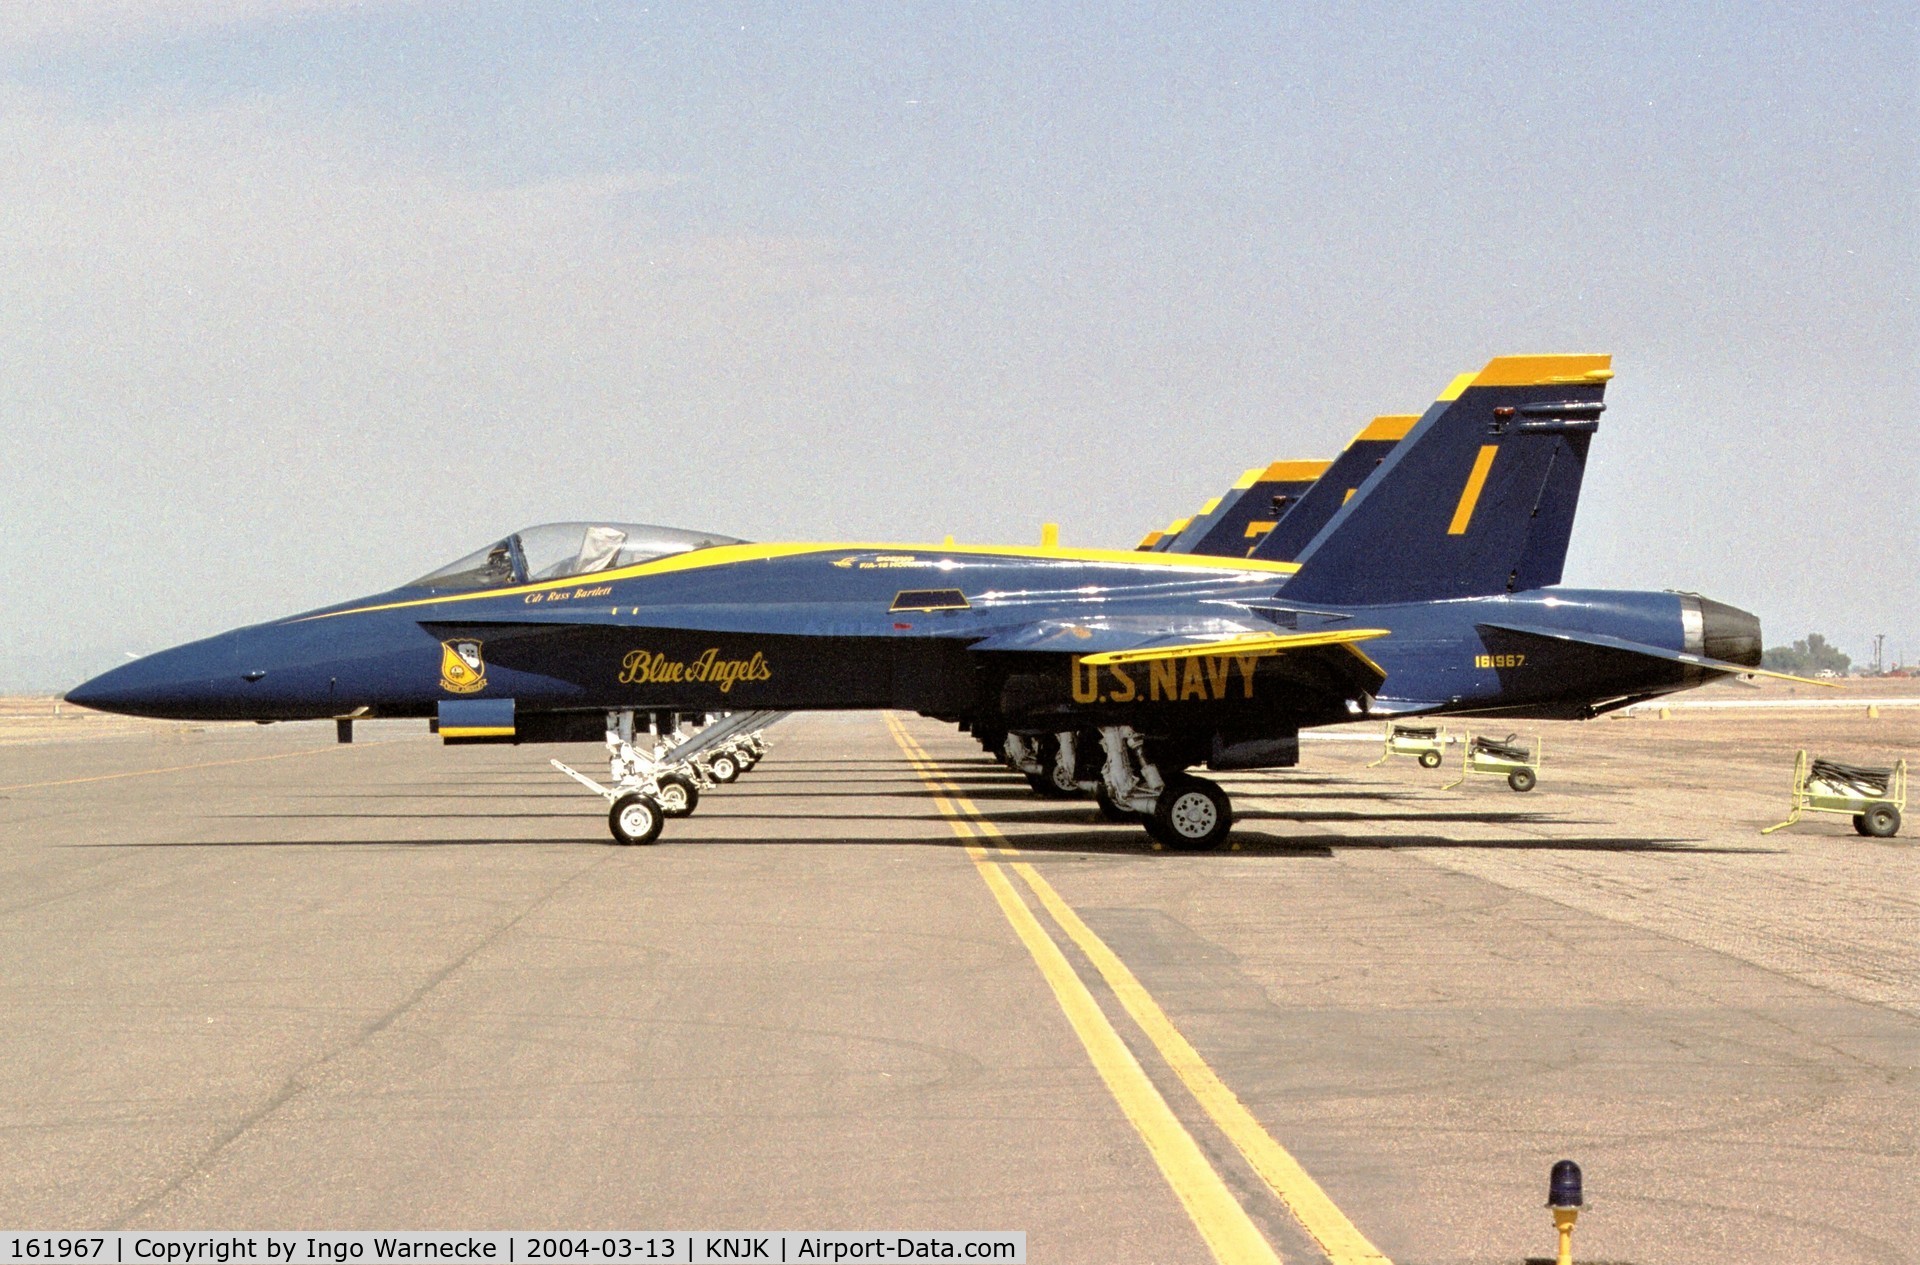 161967, McDonnell Douglas F/A-18A Hornet C/N 0183/A144, McDonnell Douglas F/A-18A Hornet of the US Navy 'Blue Angels' display team at the 2004 airshow at El Centro NAS, CA